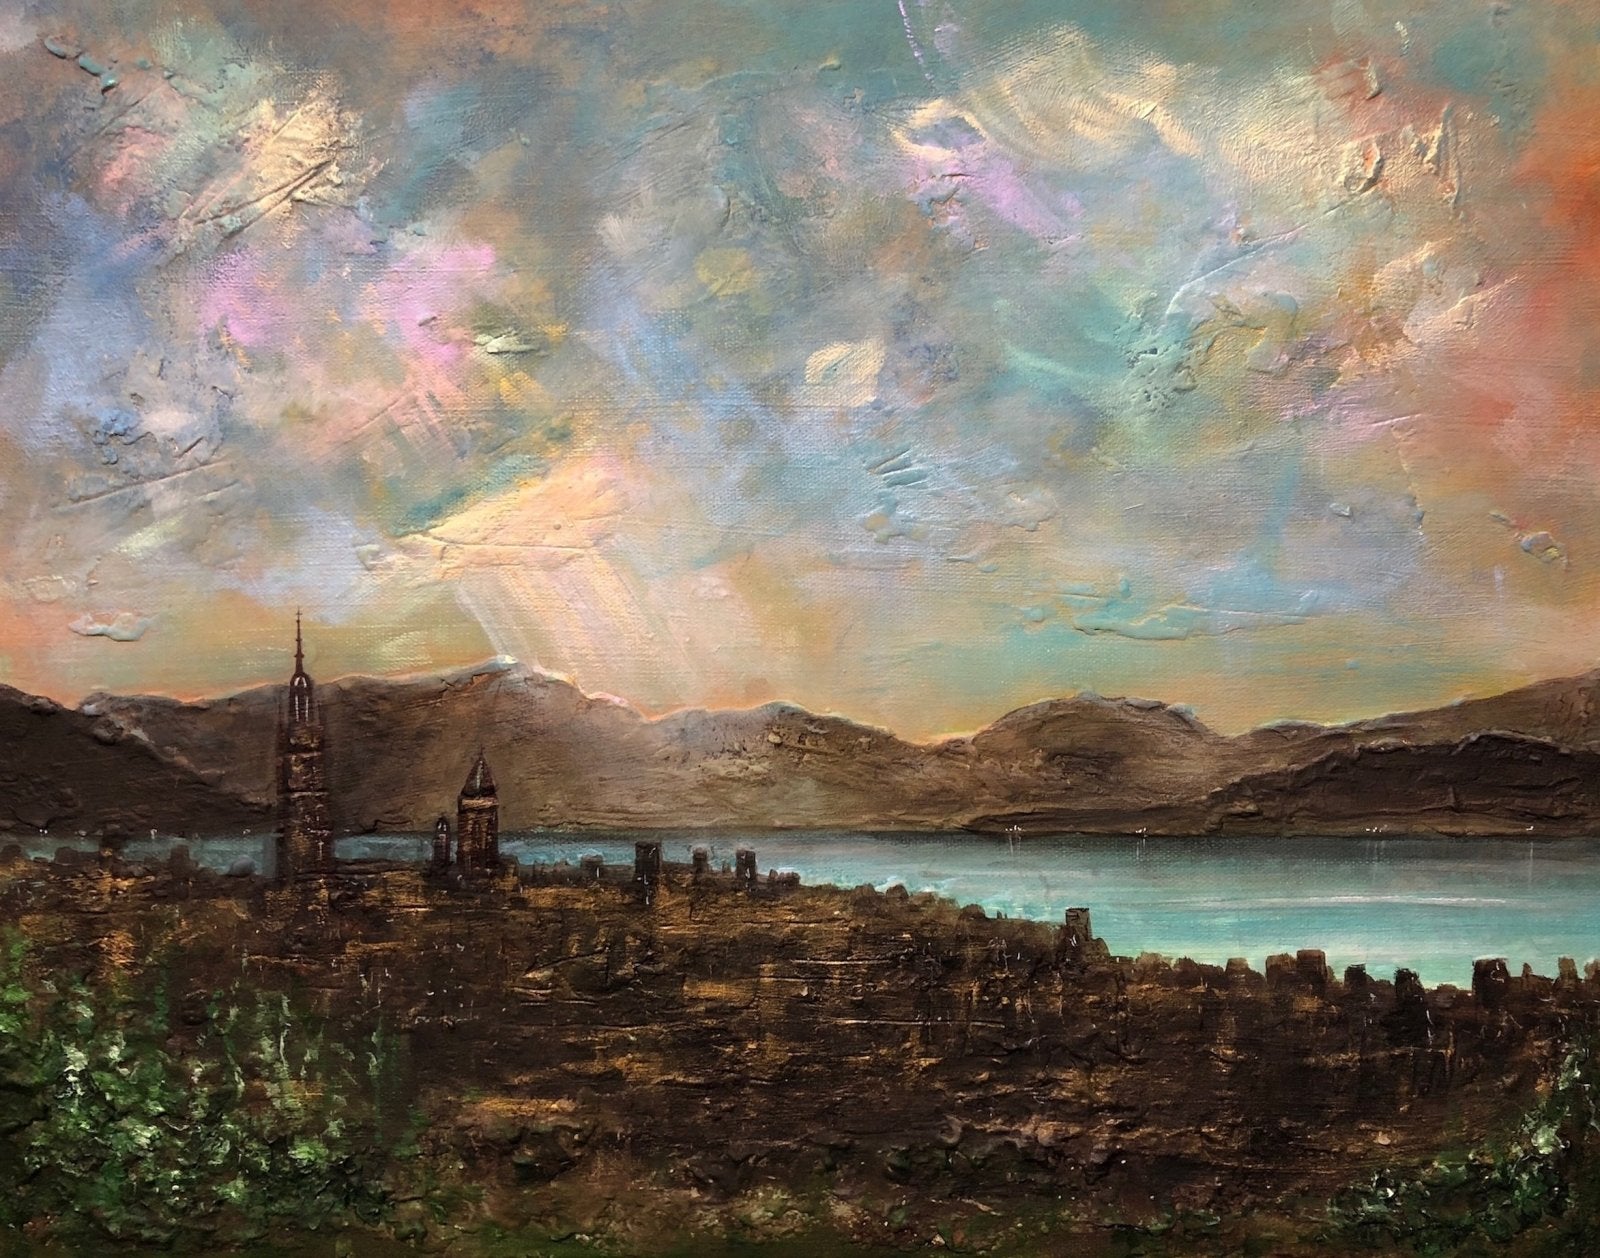 Angels Fingers Over Greenock-Signed Art Prints By Scottish Artist Hunter-River Clyde Art Gallery-Paintings, Prints, Homeware, Art Gifts From Scotland By Scottish Artist Kevin Hunter